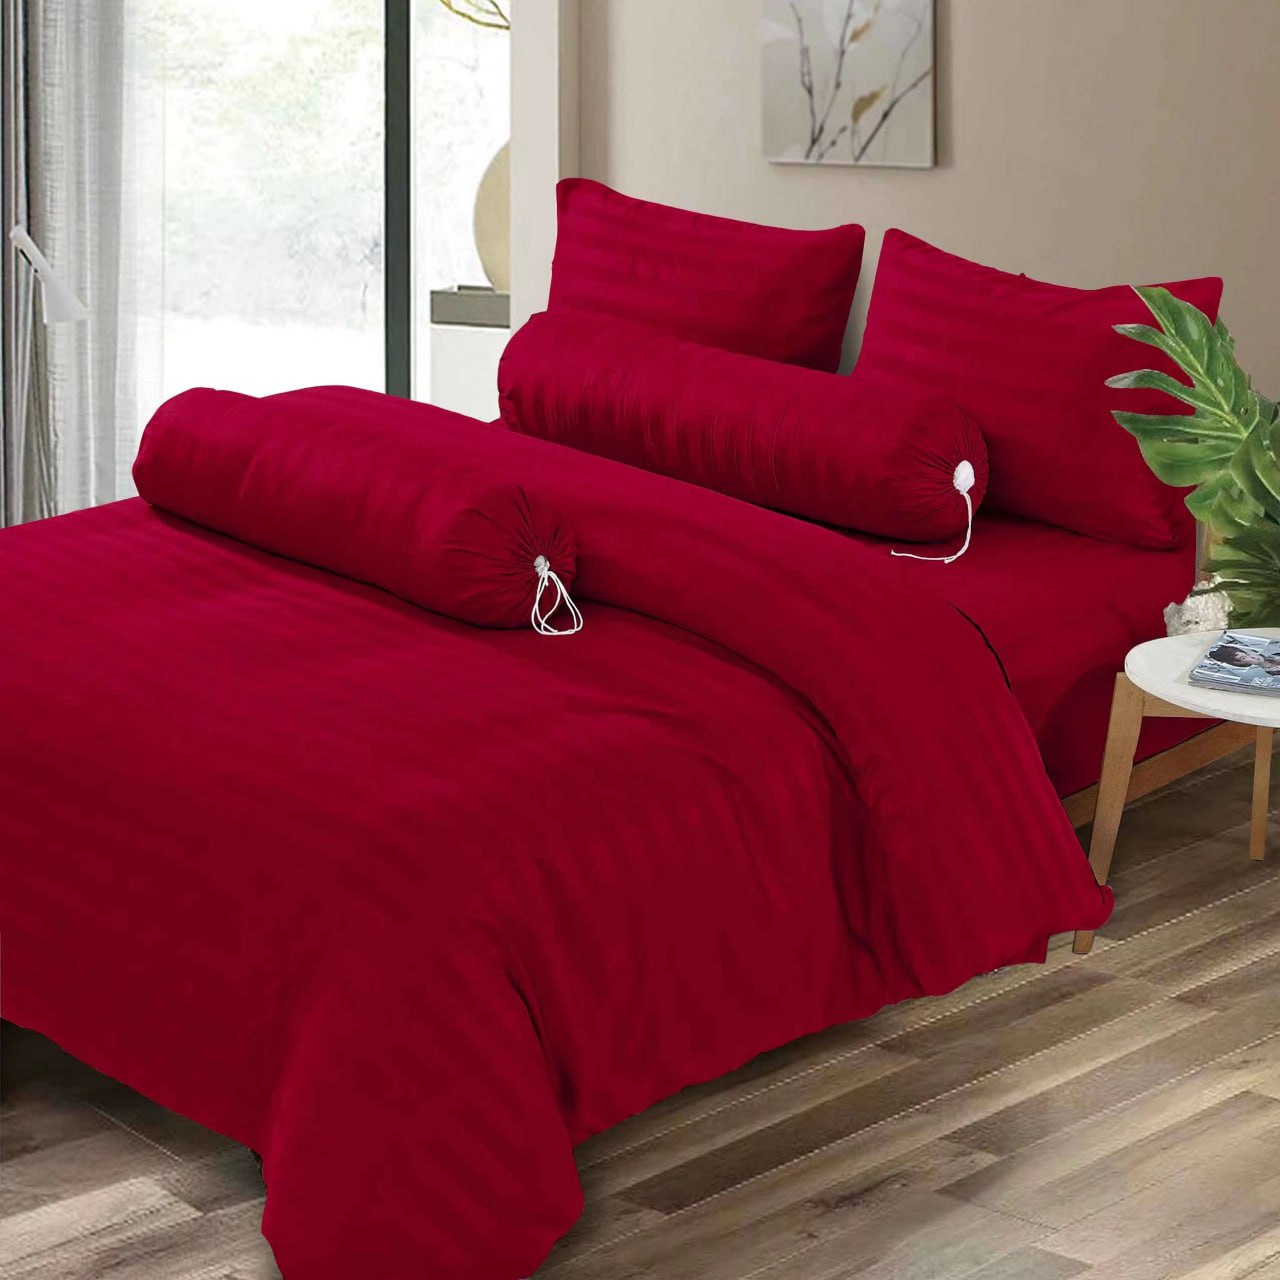 Microtex King Bedding Set with Pillow & Bolster Case